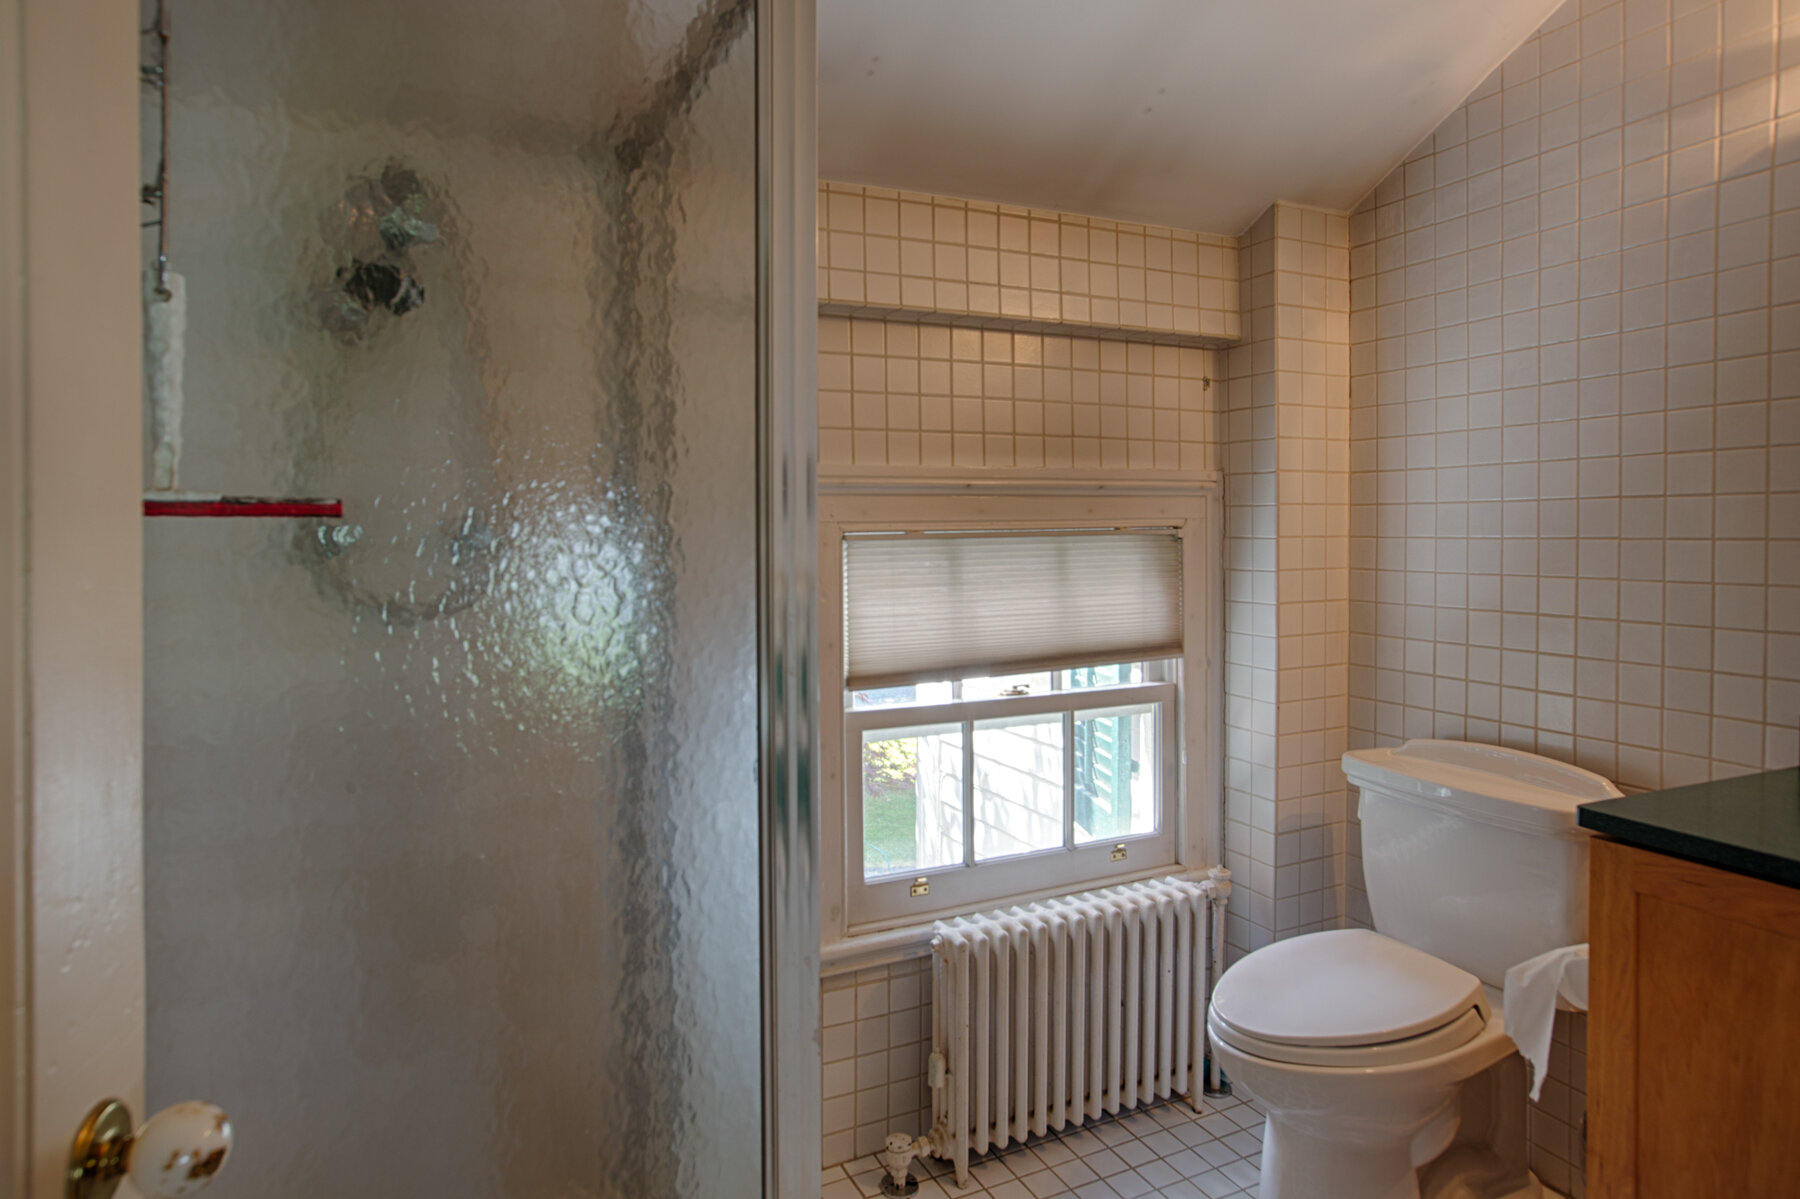  Bathroom with stand up shower, toilet and vanity. Small white tiles are not he floor and wall. 